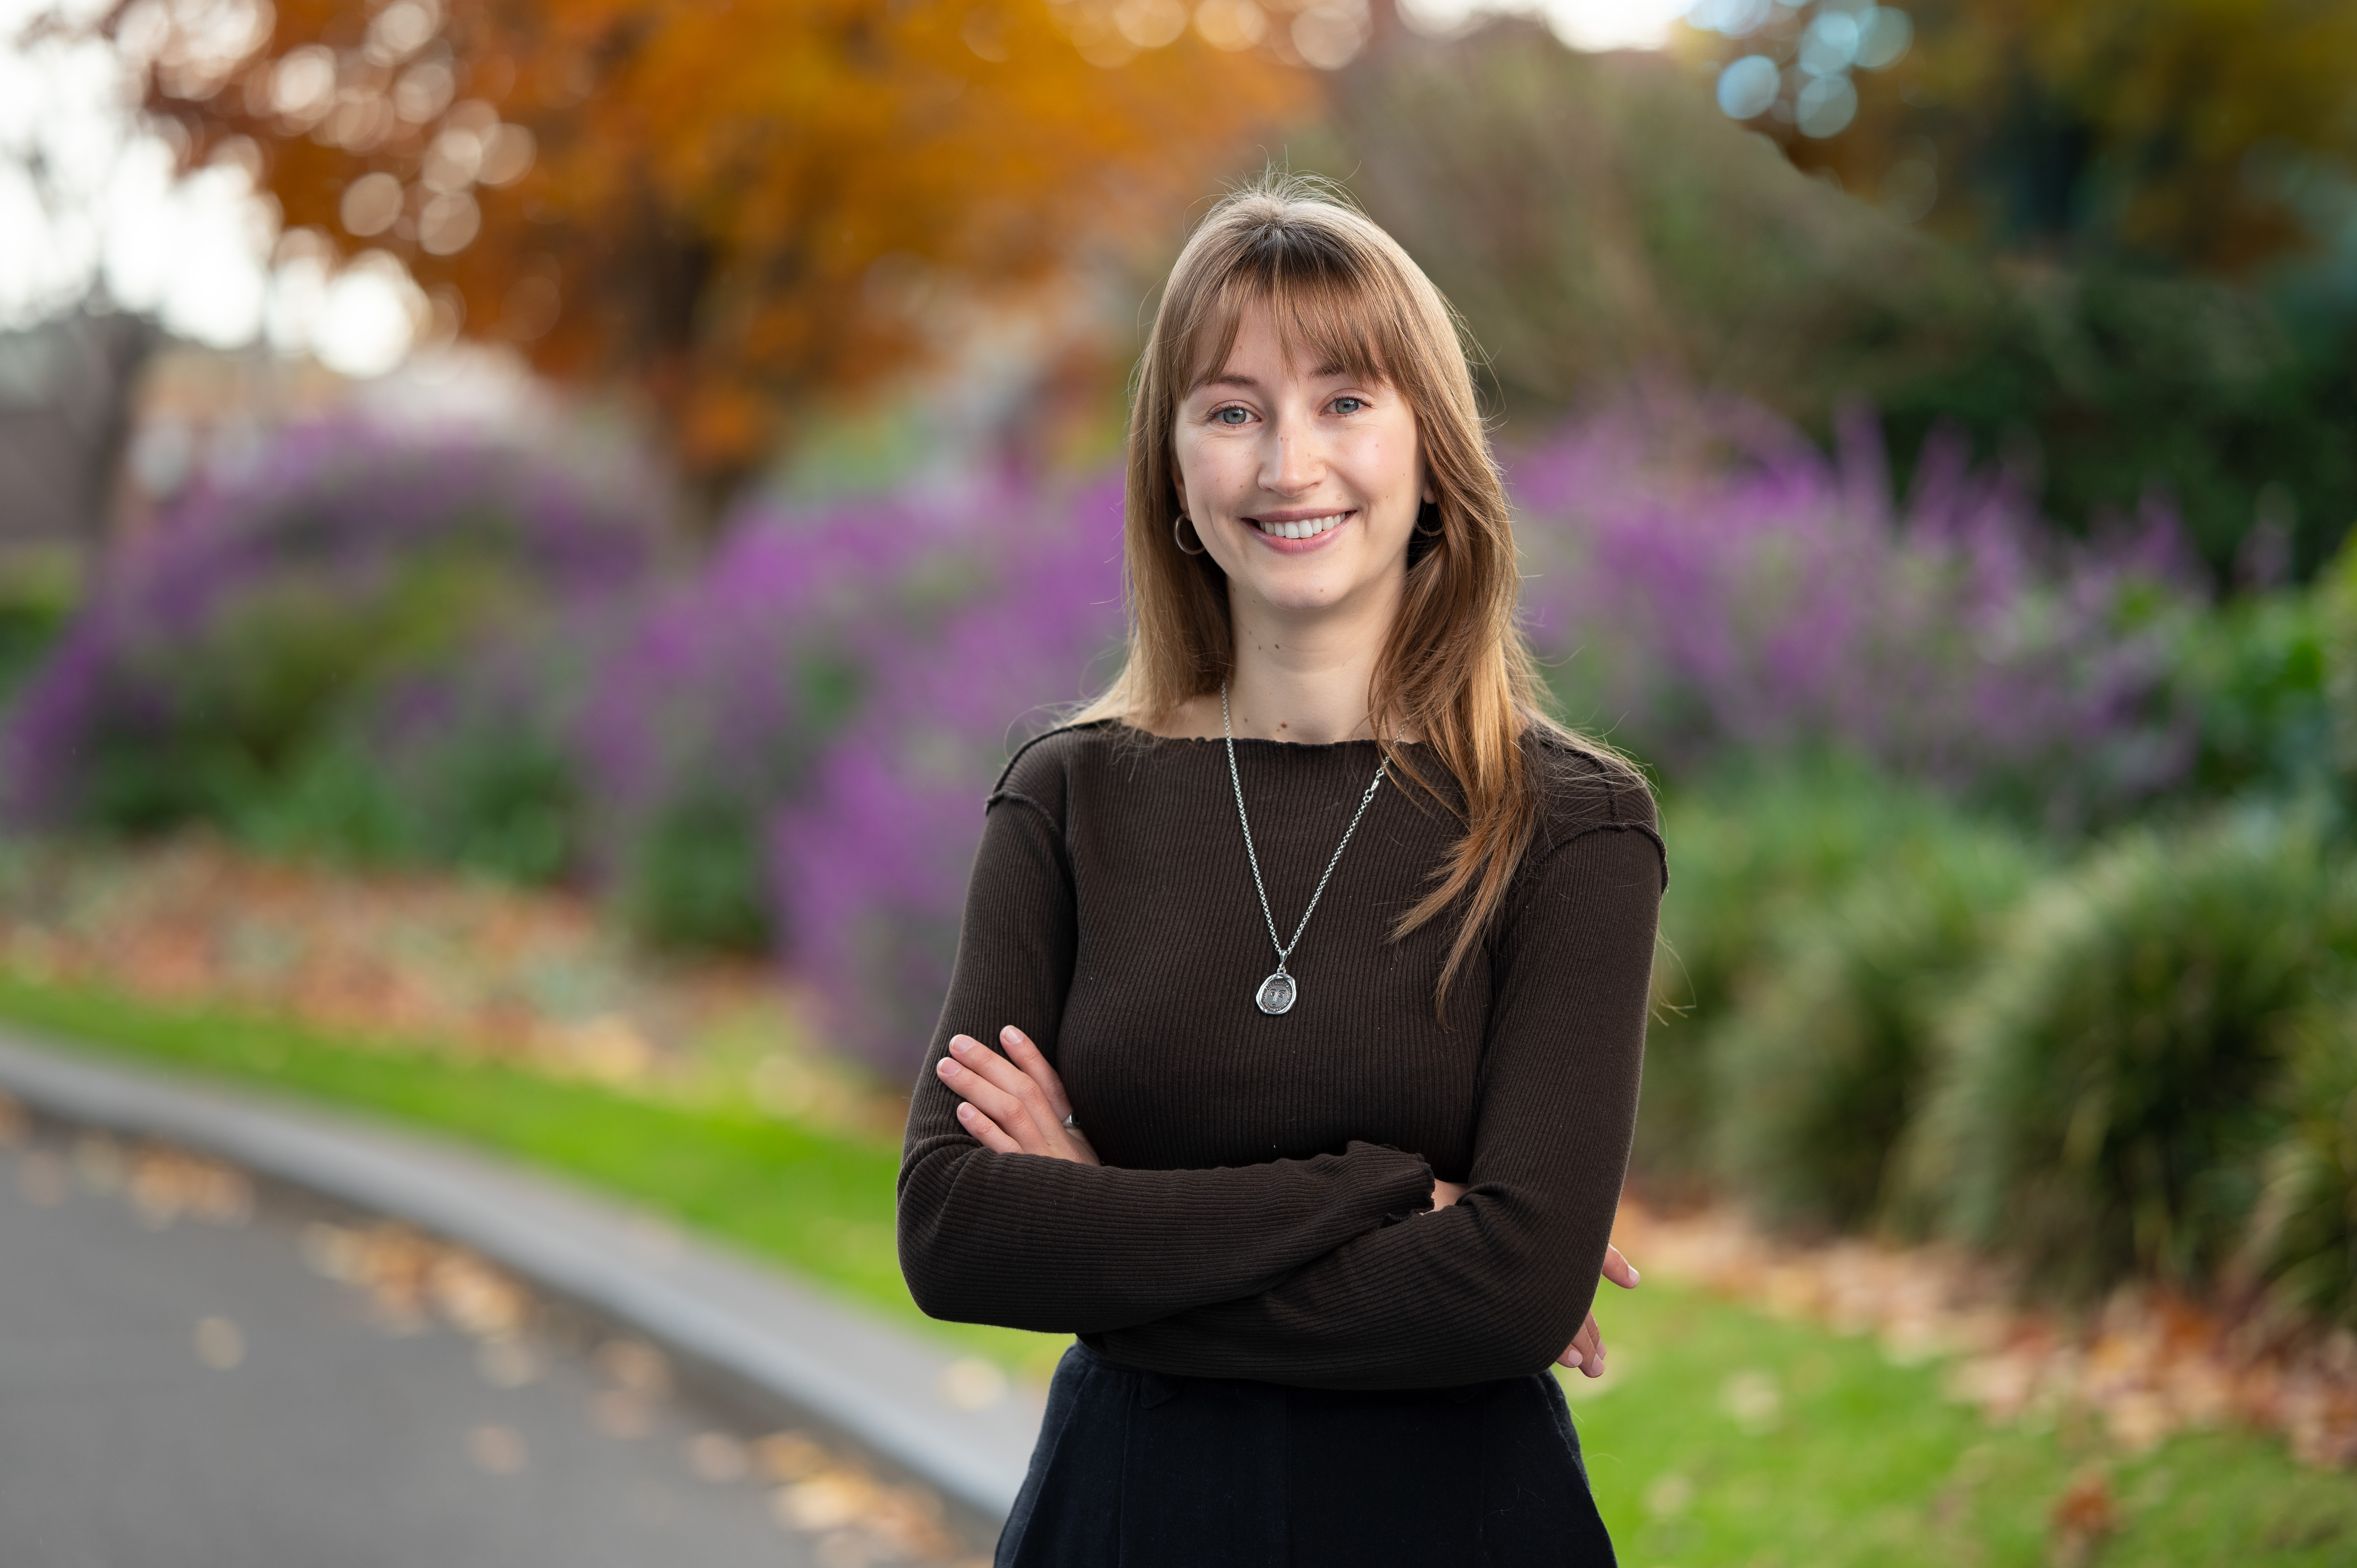 Josie Foster, Greens Candidate for Port Phillip City Council - Alma Ward